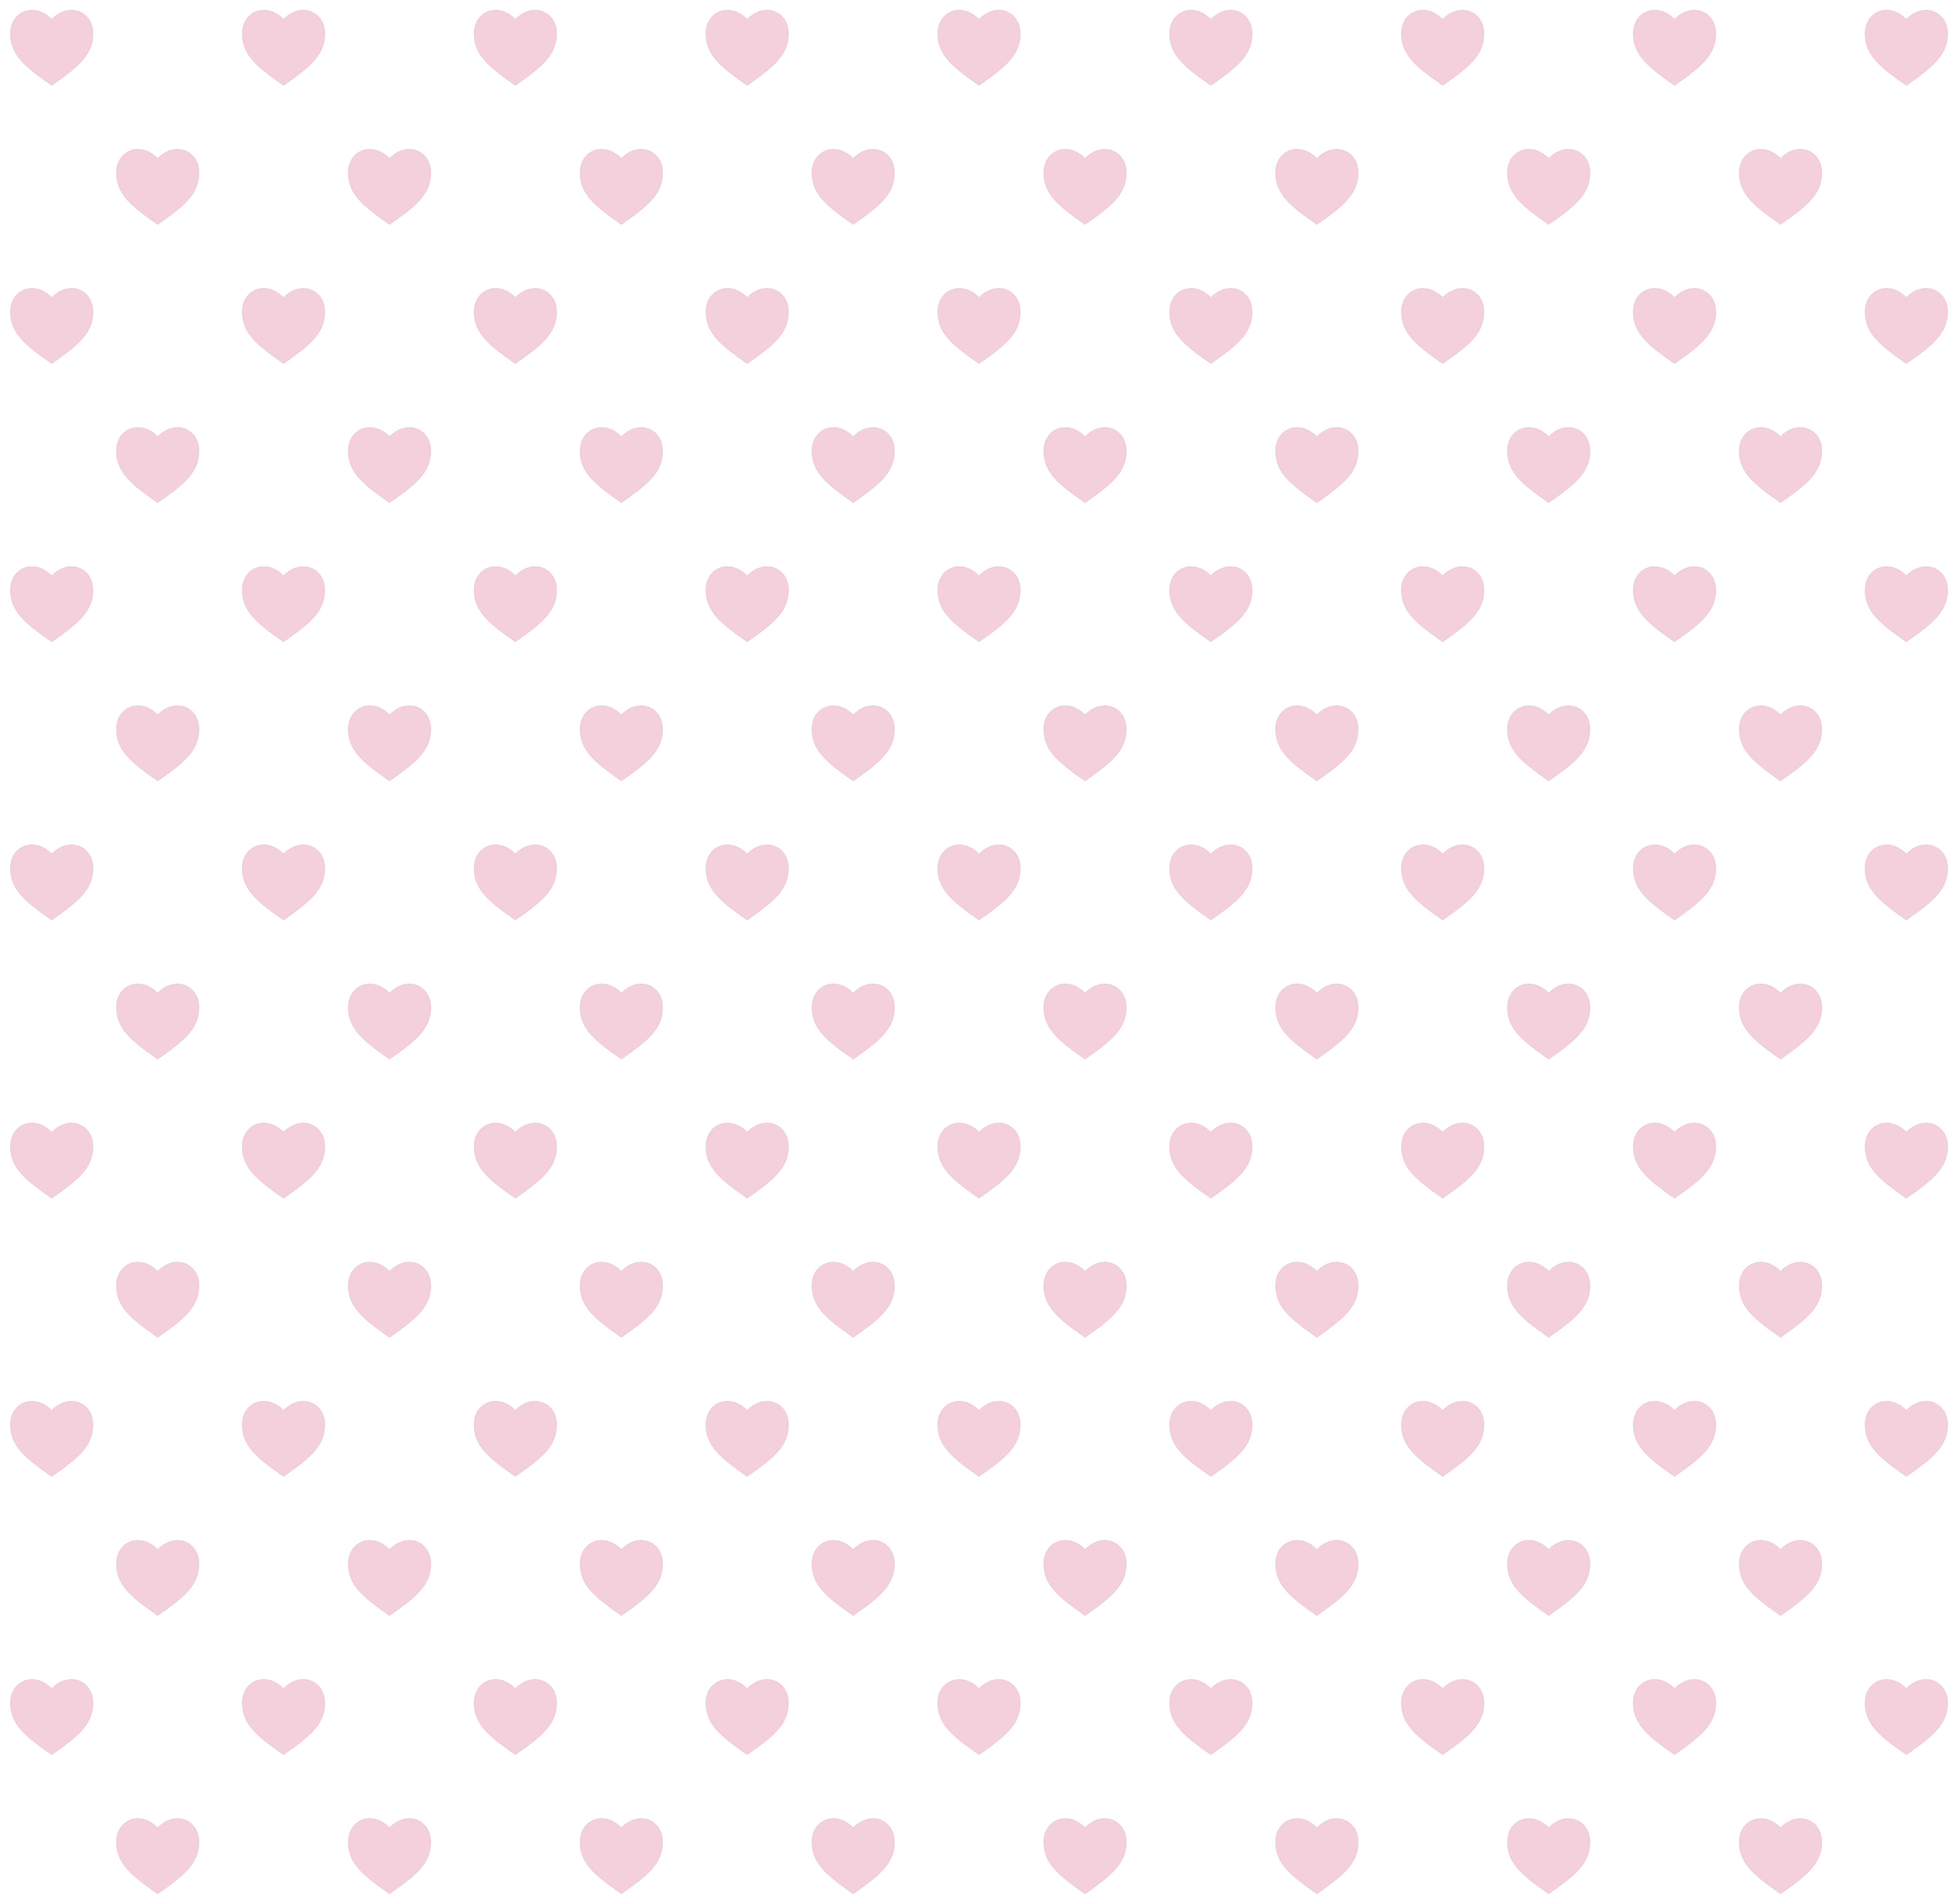 Background Hearts PNG Clip Art Image​ | Gallery Yopriceville - High-Quality  Free Images and Transparent PNG Clipart